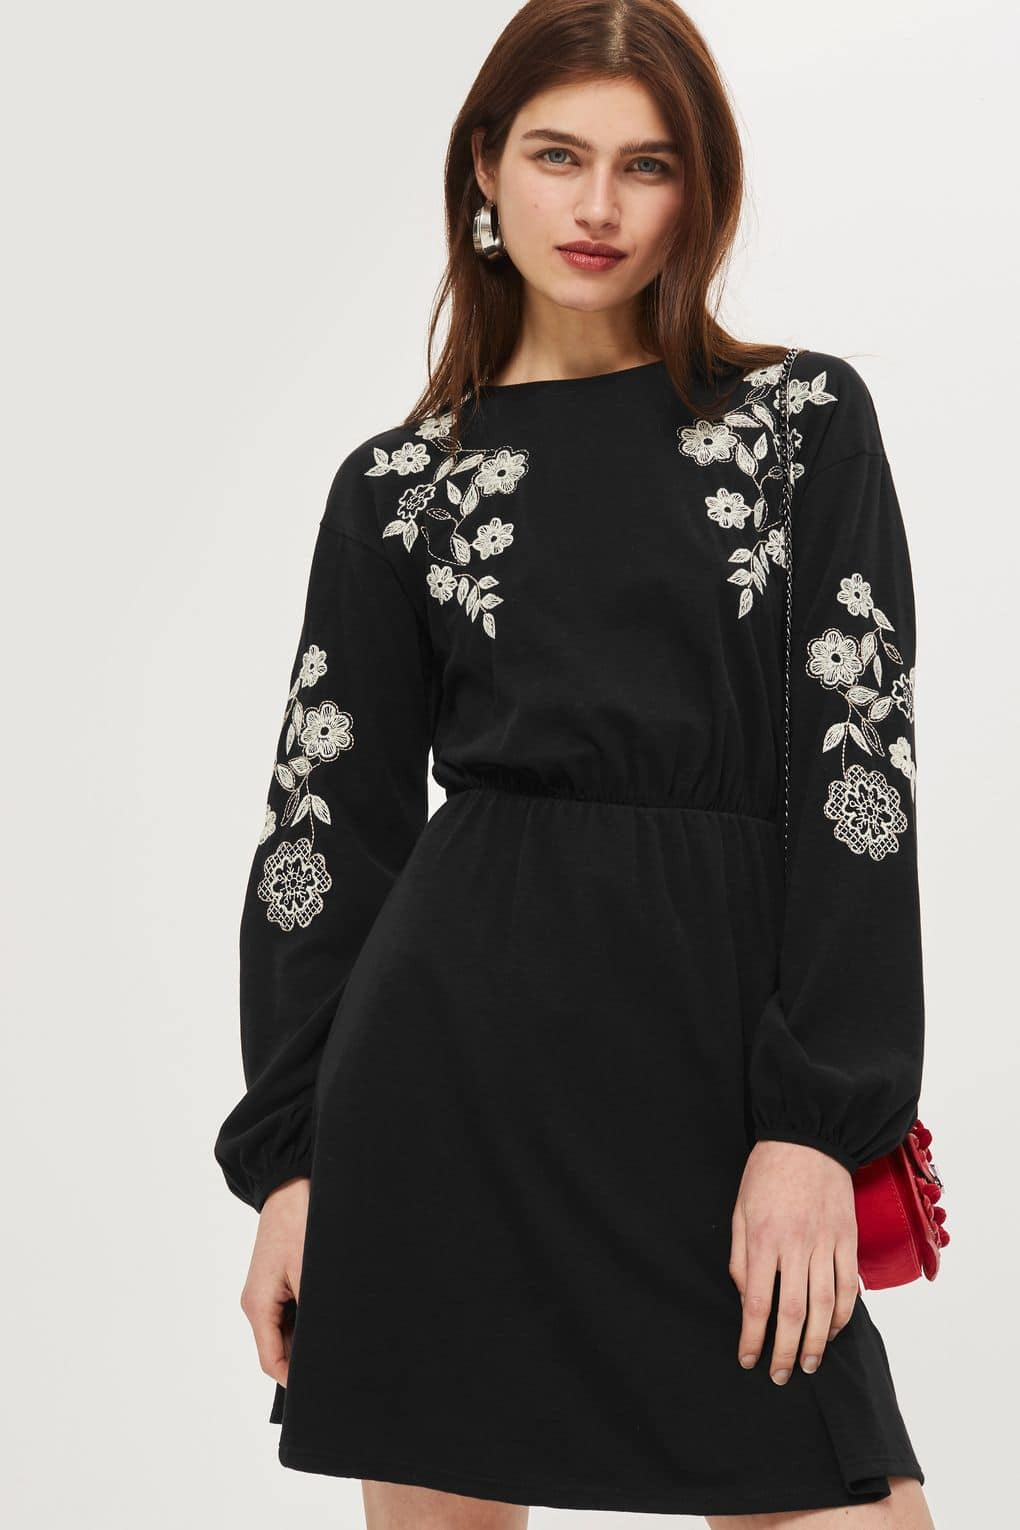 TOP SHOP Embroidered Balloon Sleeve Skater Black Dress